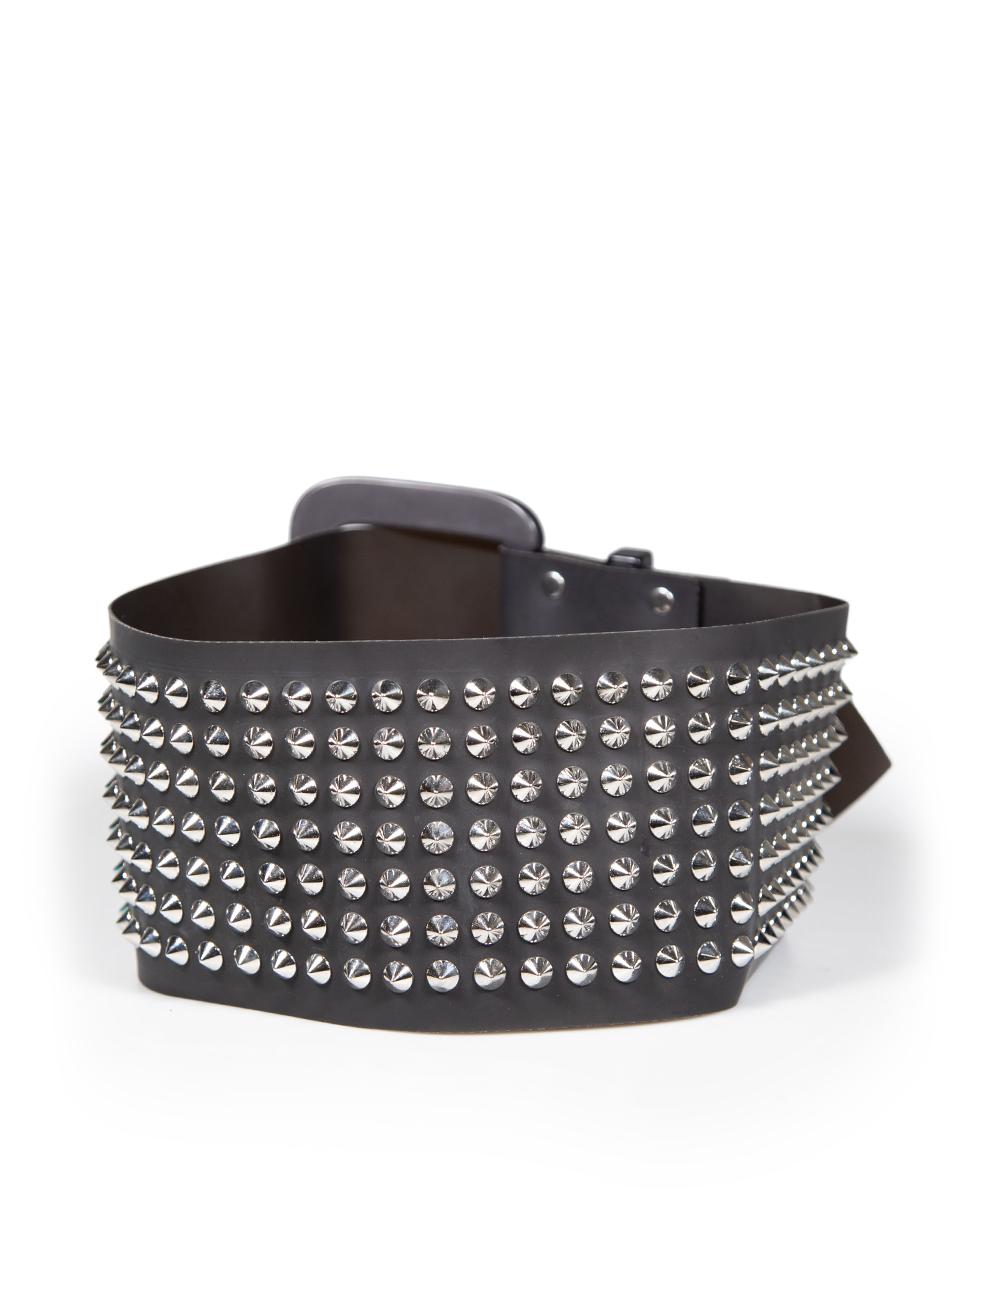 Acne Studios Black Large Studded Belt In Good Condition For Sale In London, GB